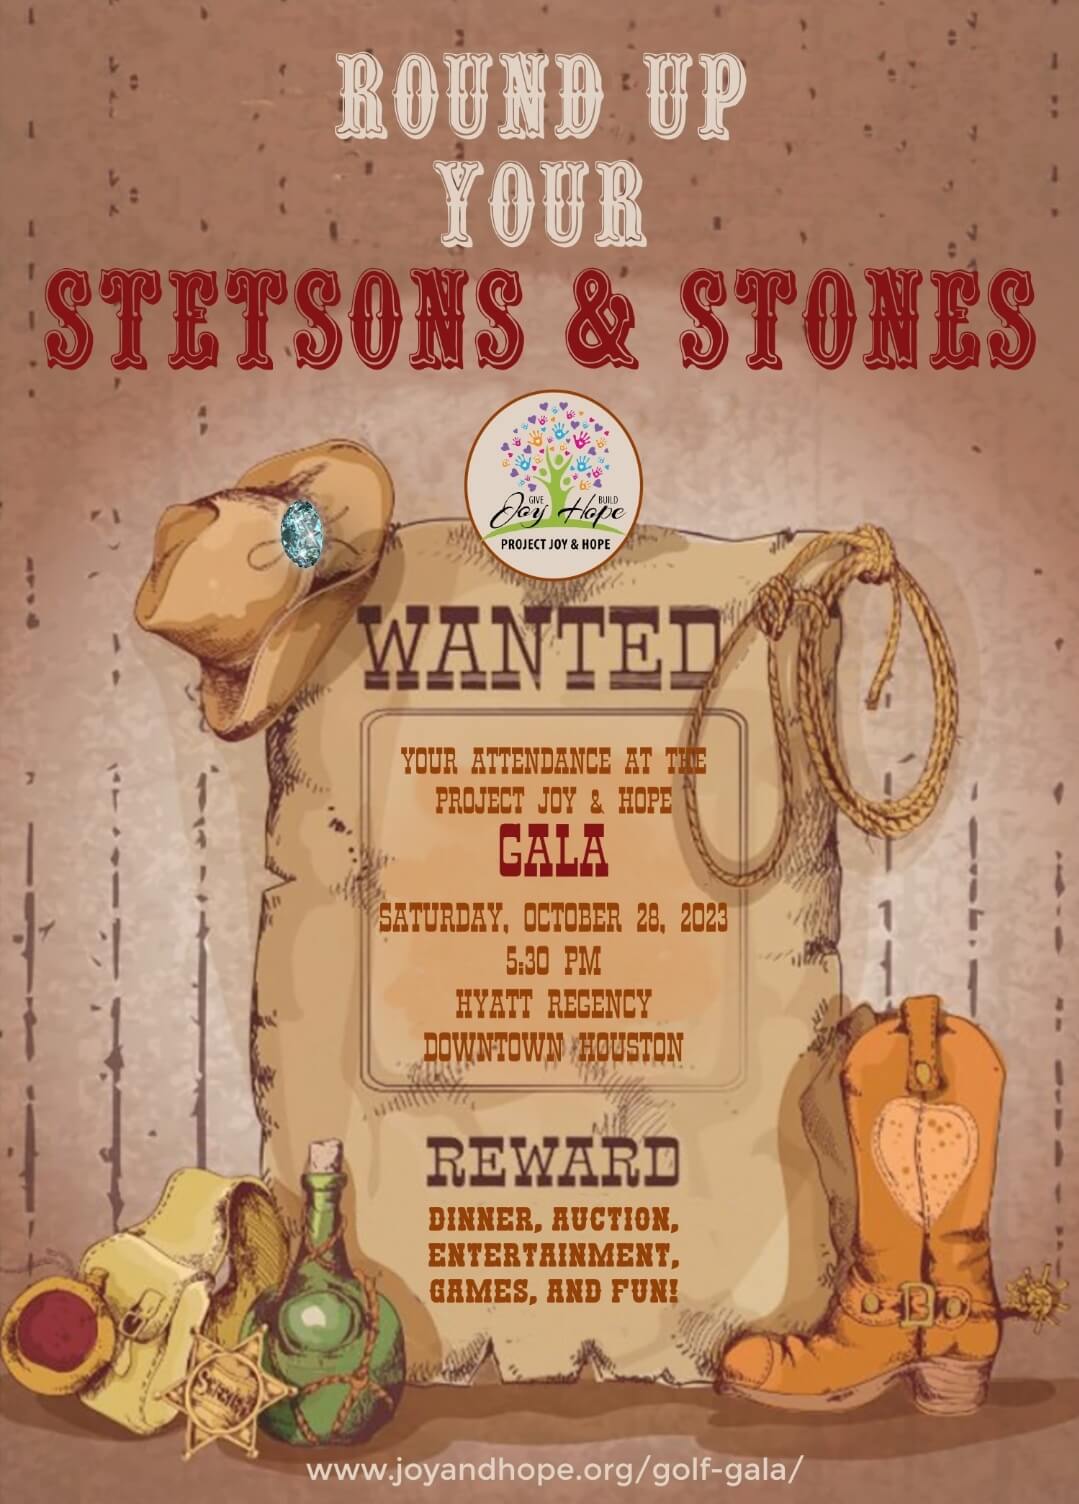 Round Up Your Stetsons & Stones